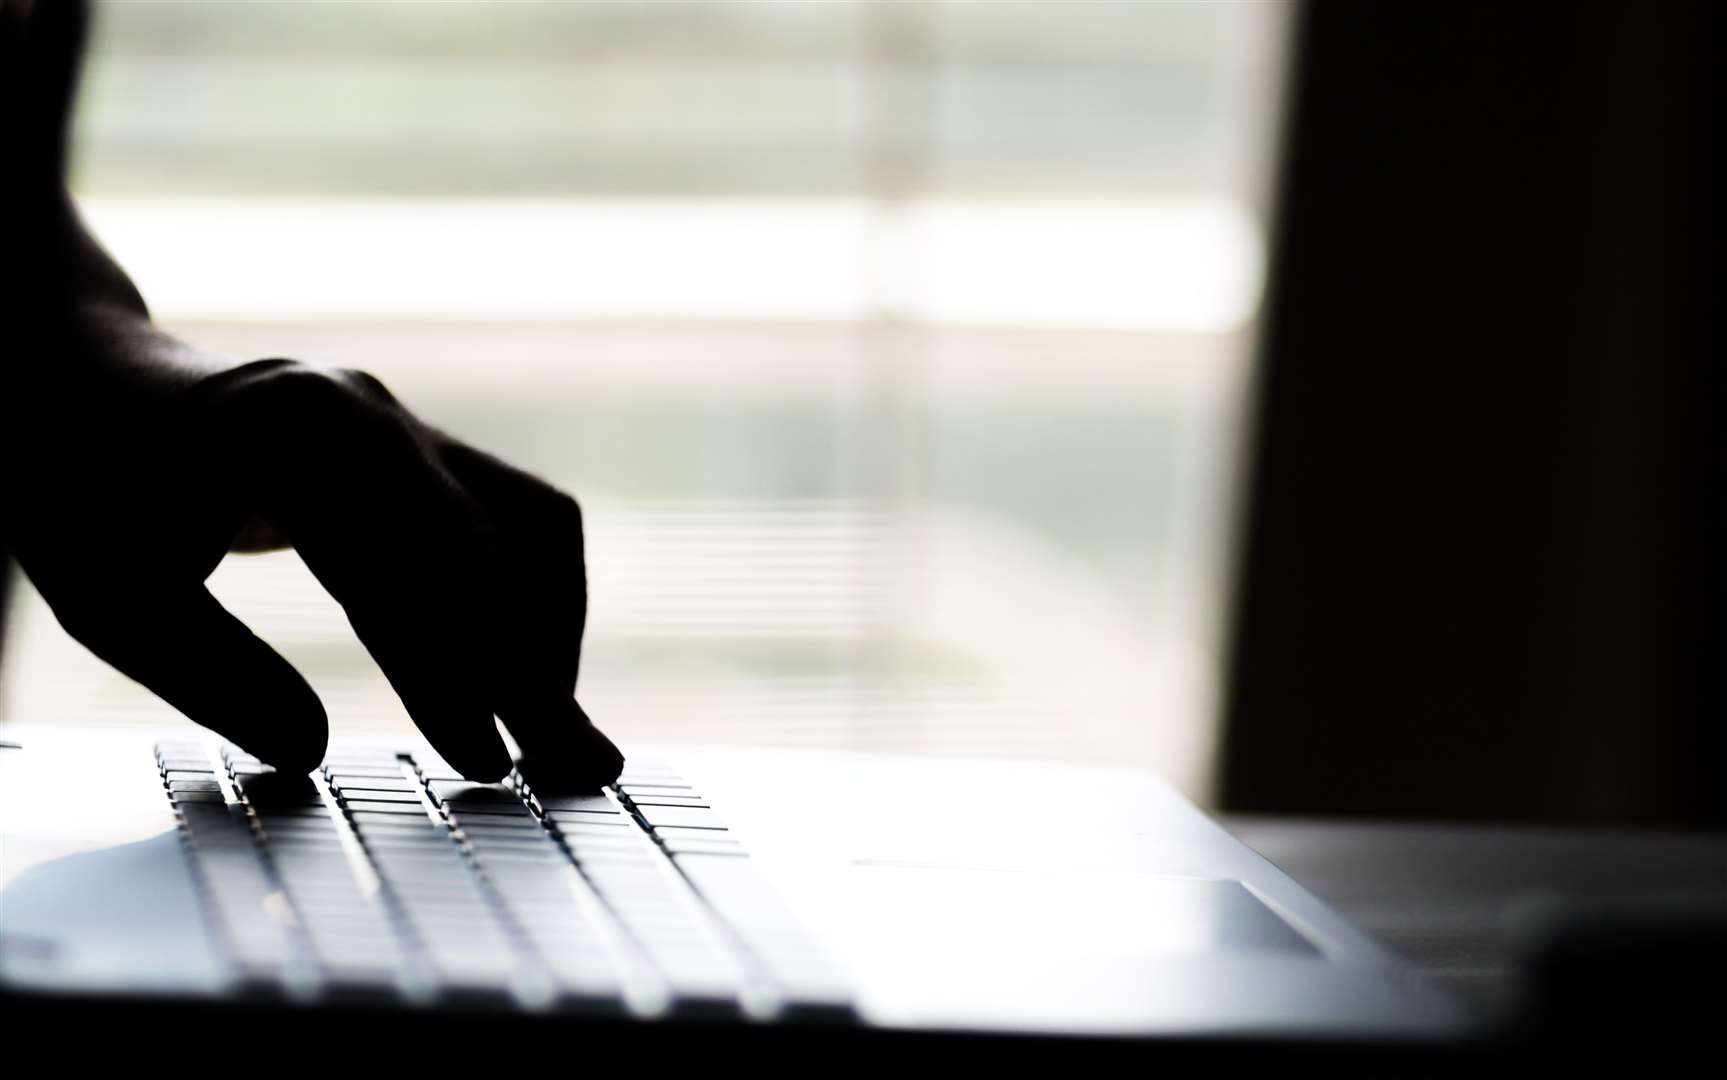 A 73-year-old man from Aberdeenshire was targeted in the cyber fraud.